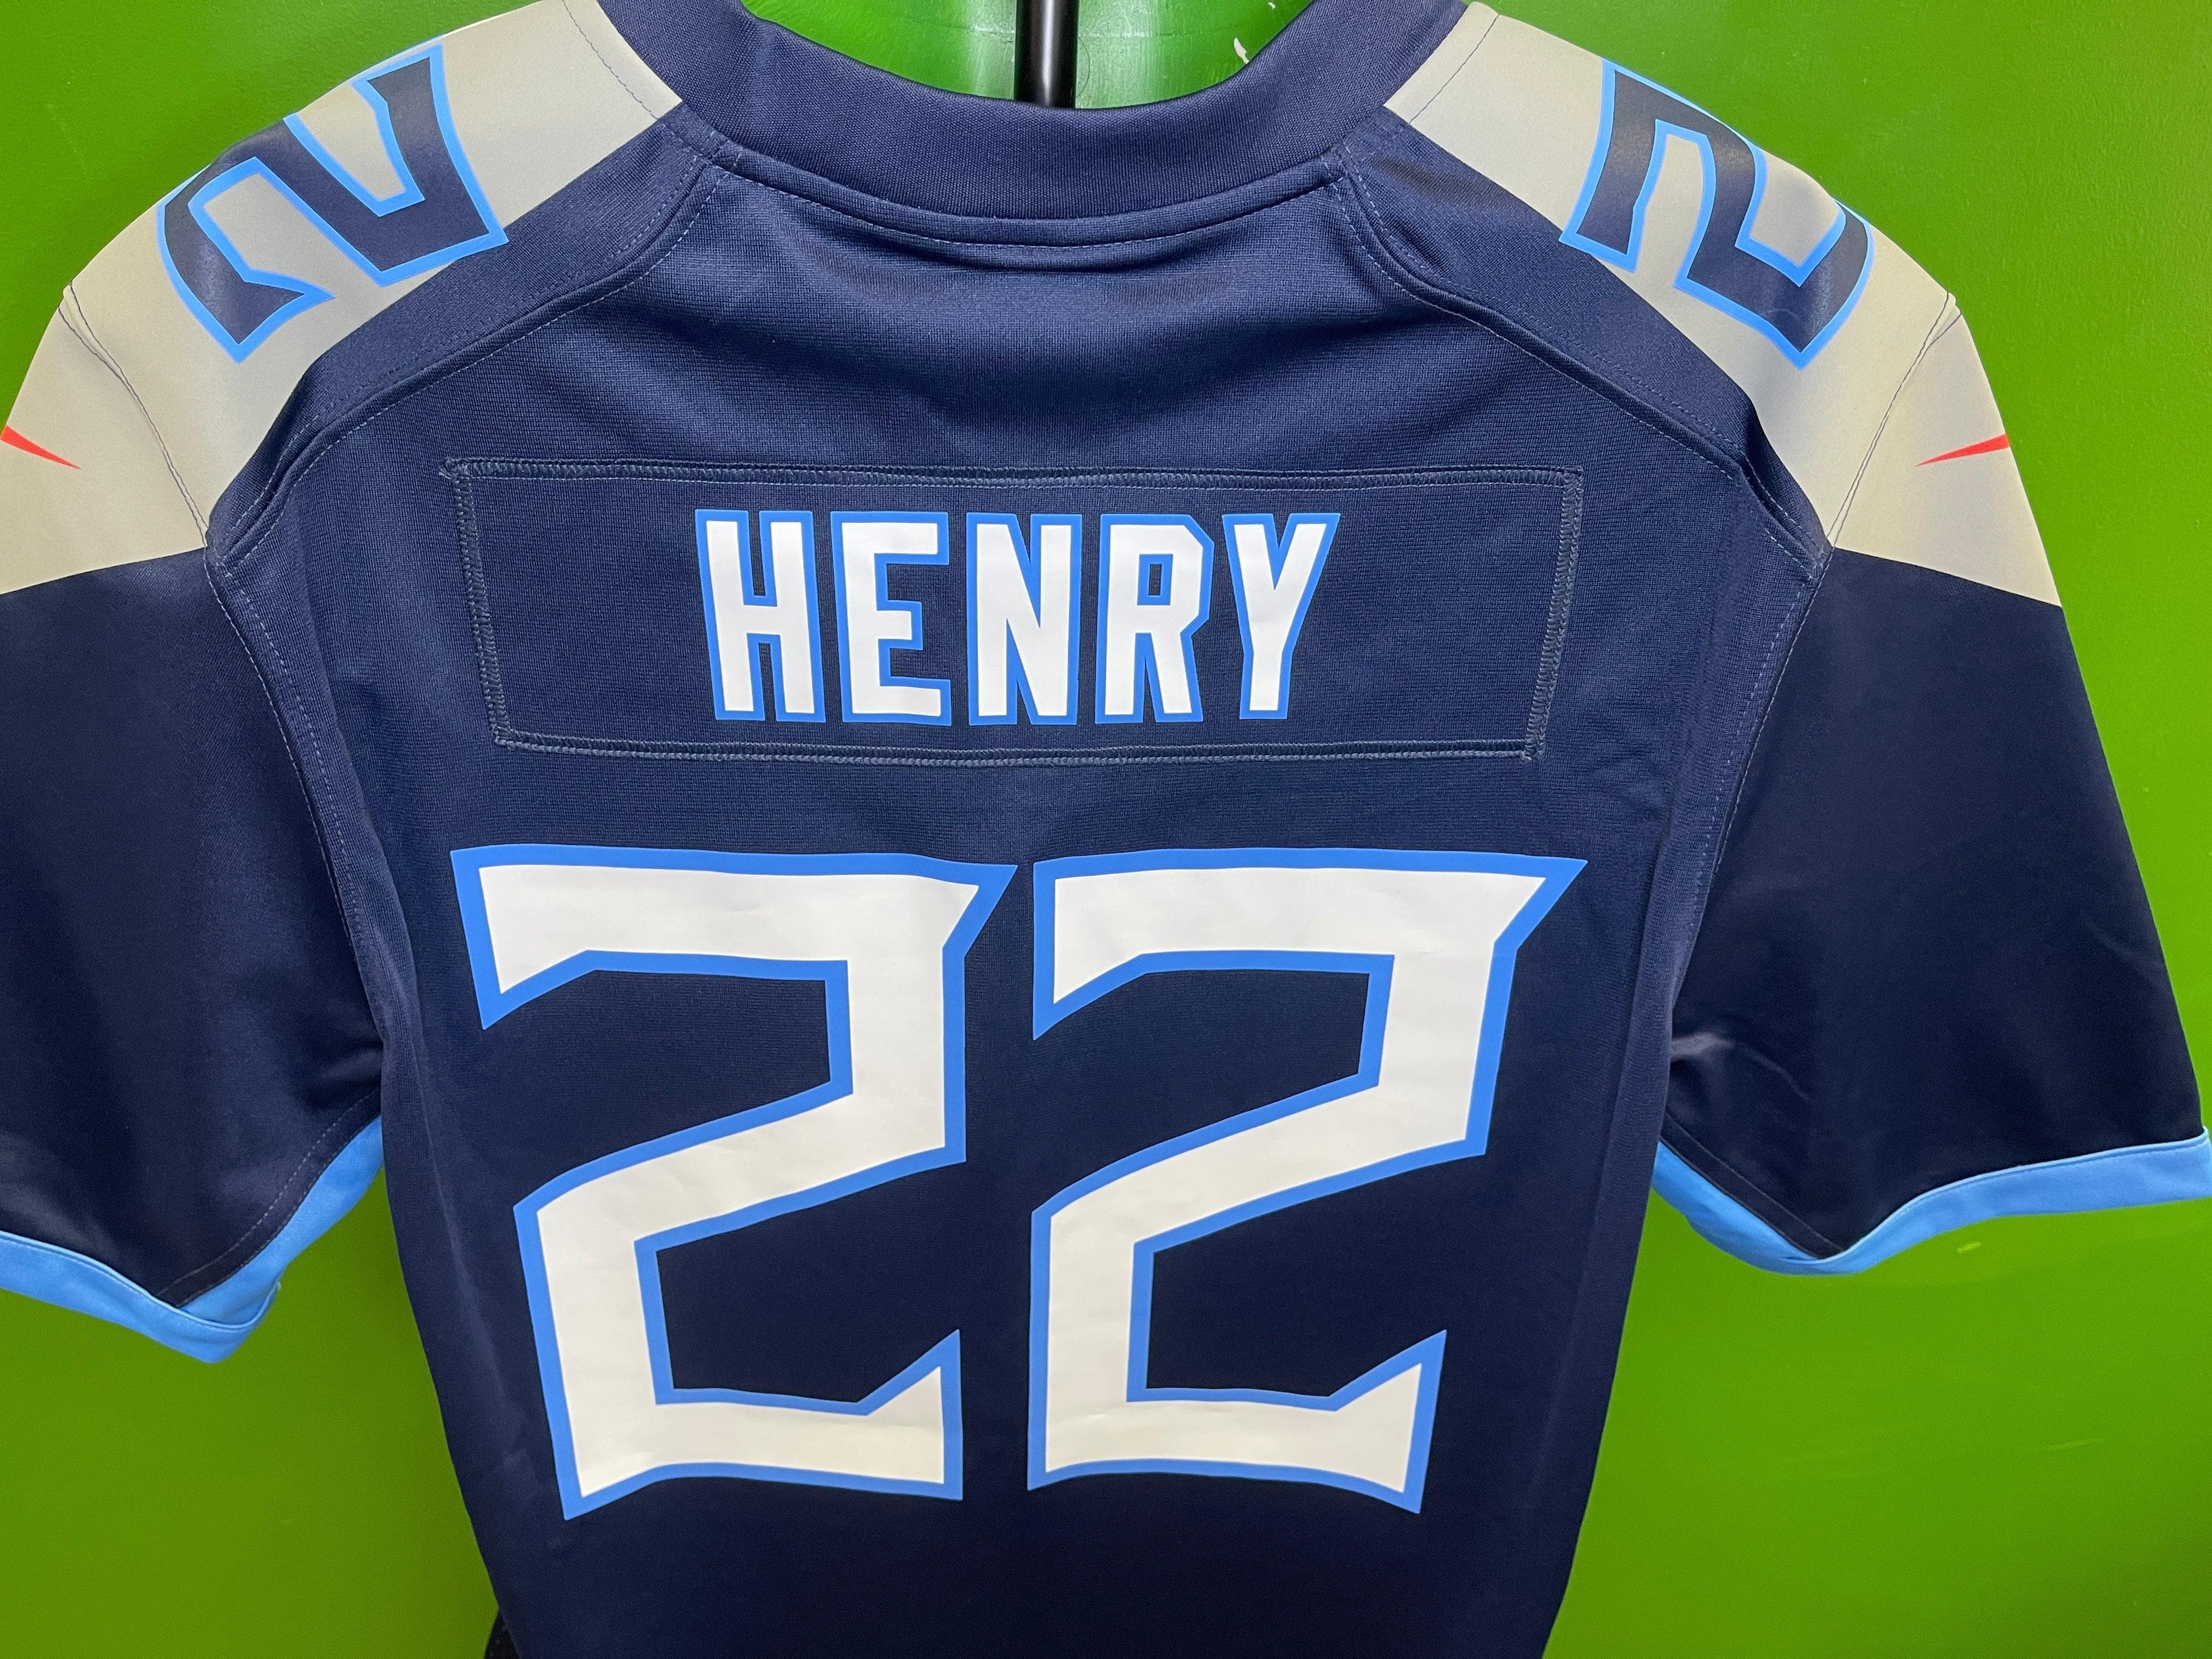 Titans RB Derrick Henry: “I Am Ready to Go Out There and Play”